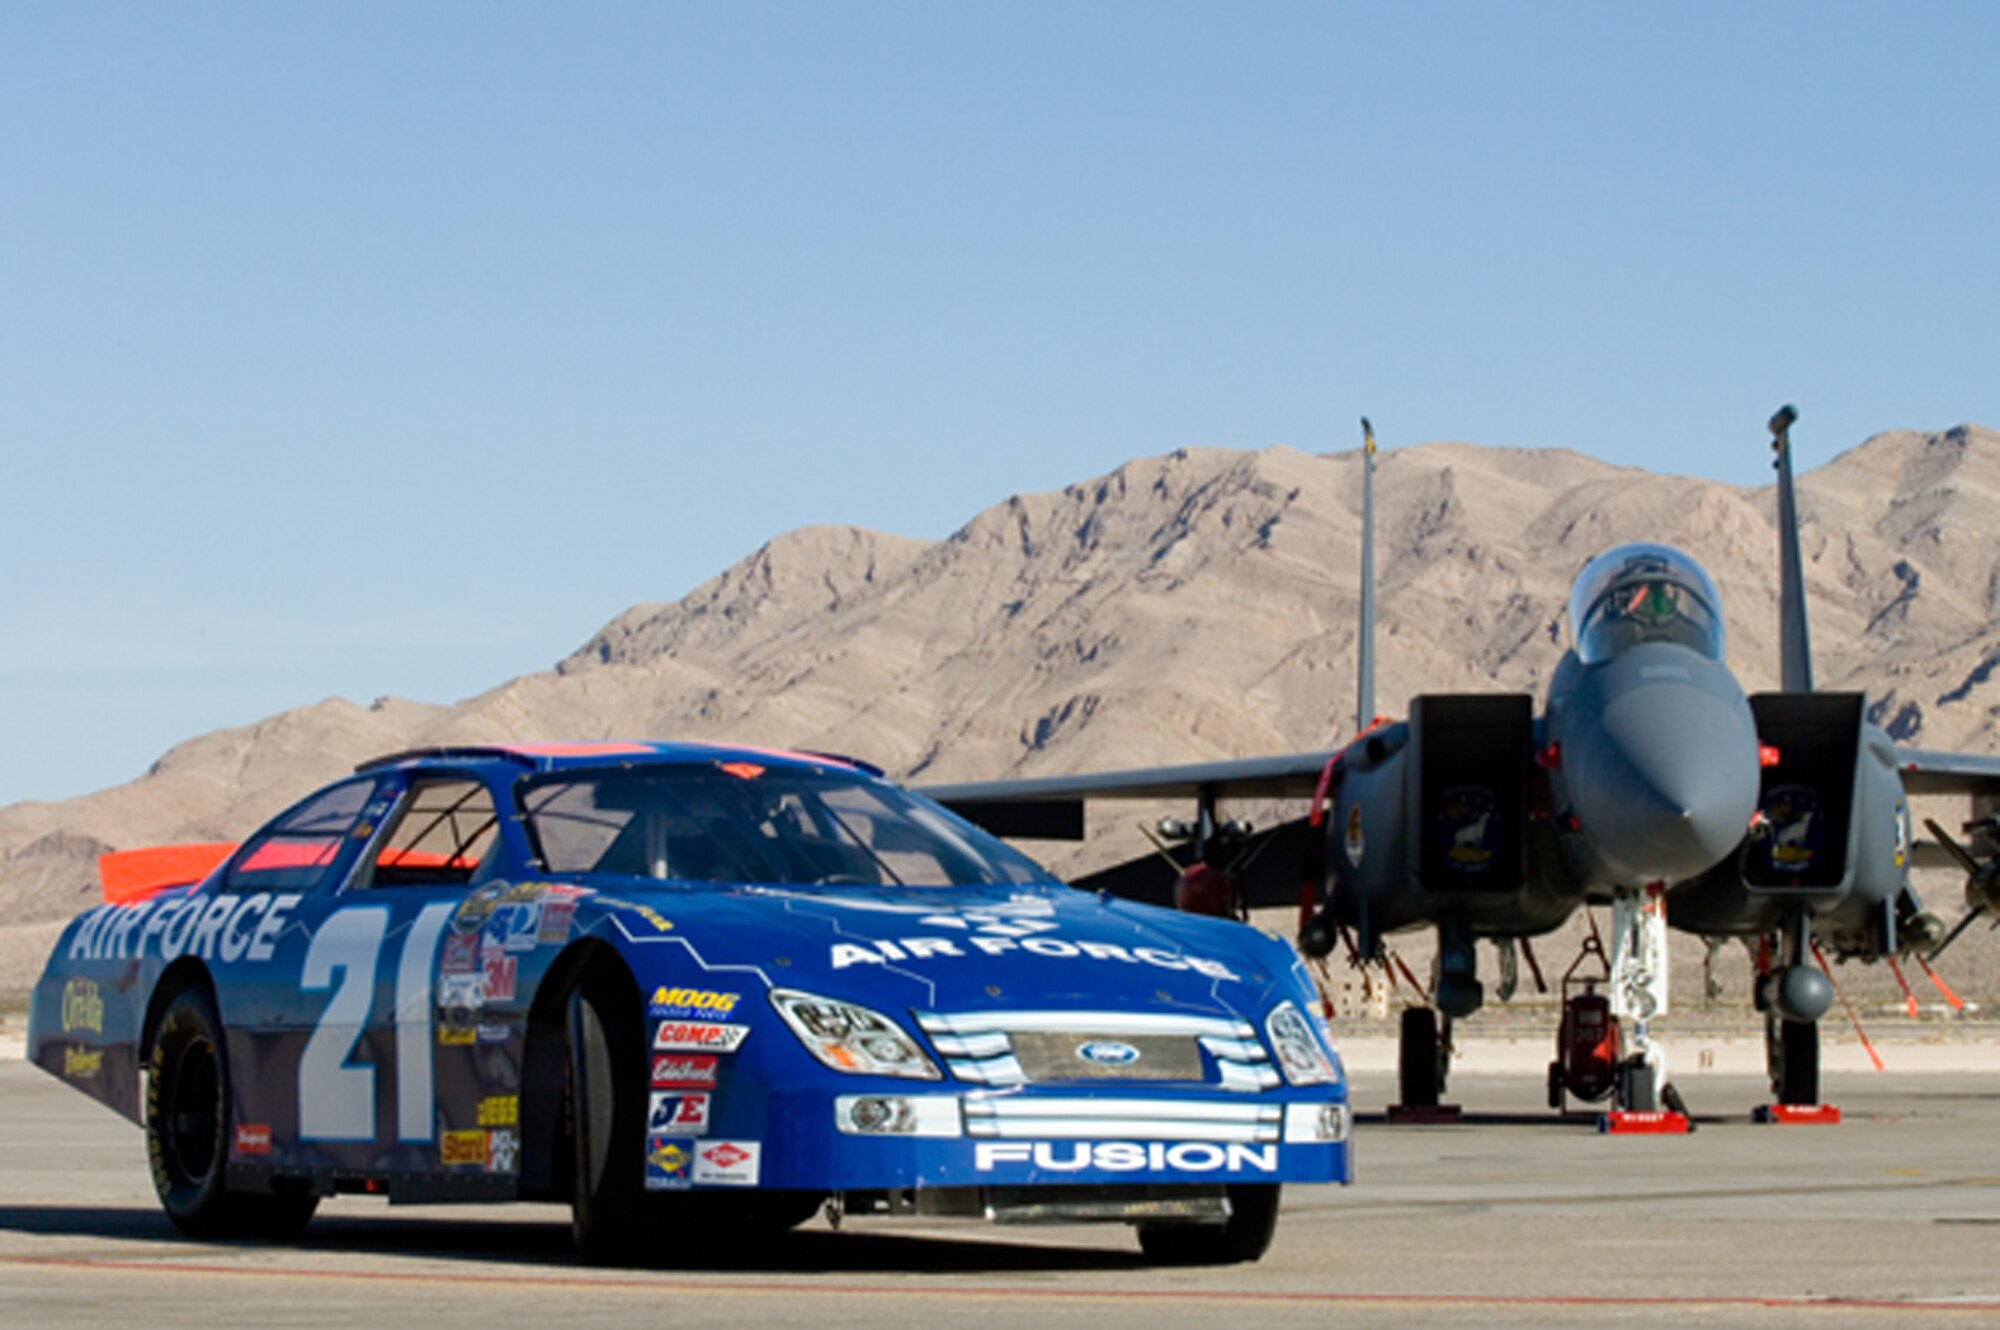 The Air Force-sponsored Nextel Cup car shares the Nellis Air Force Base, Nev., flightline with another Air Force powerhouse, the F-15 Eagle, on March 8.  The car, driven by Jon Wood, was brought to Nellis so Airmen could have a close-up look before its NASCAR Nextel Cup UAW Daimler-Chrysler 400 race on Sunday, March 10. (U.S. Air Force Photo by Master Sgt Robert W. Valenca)    
